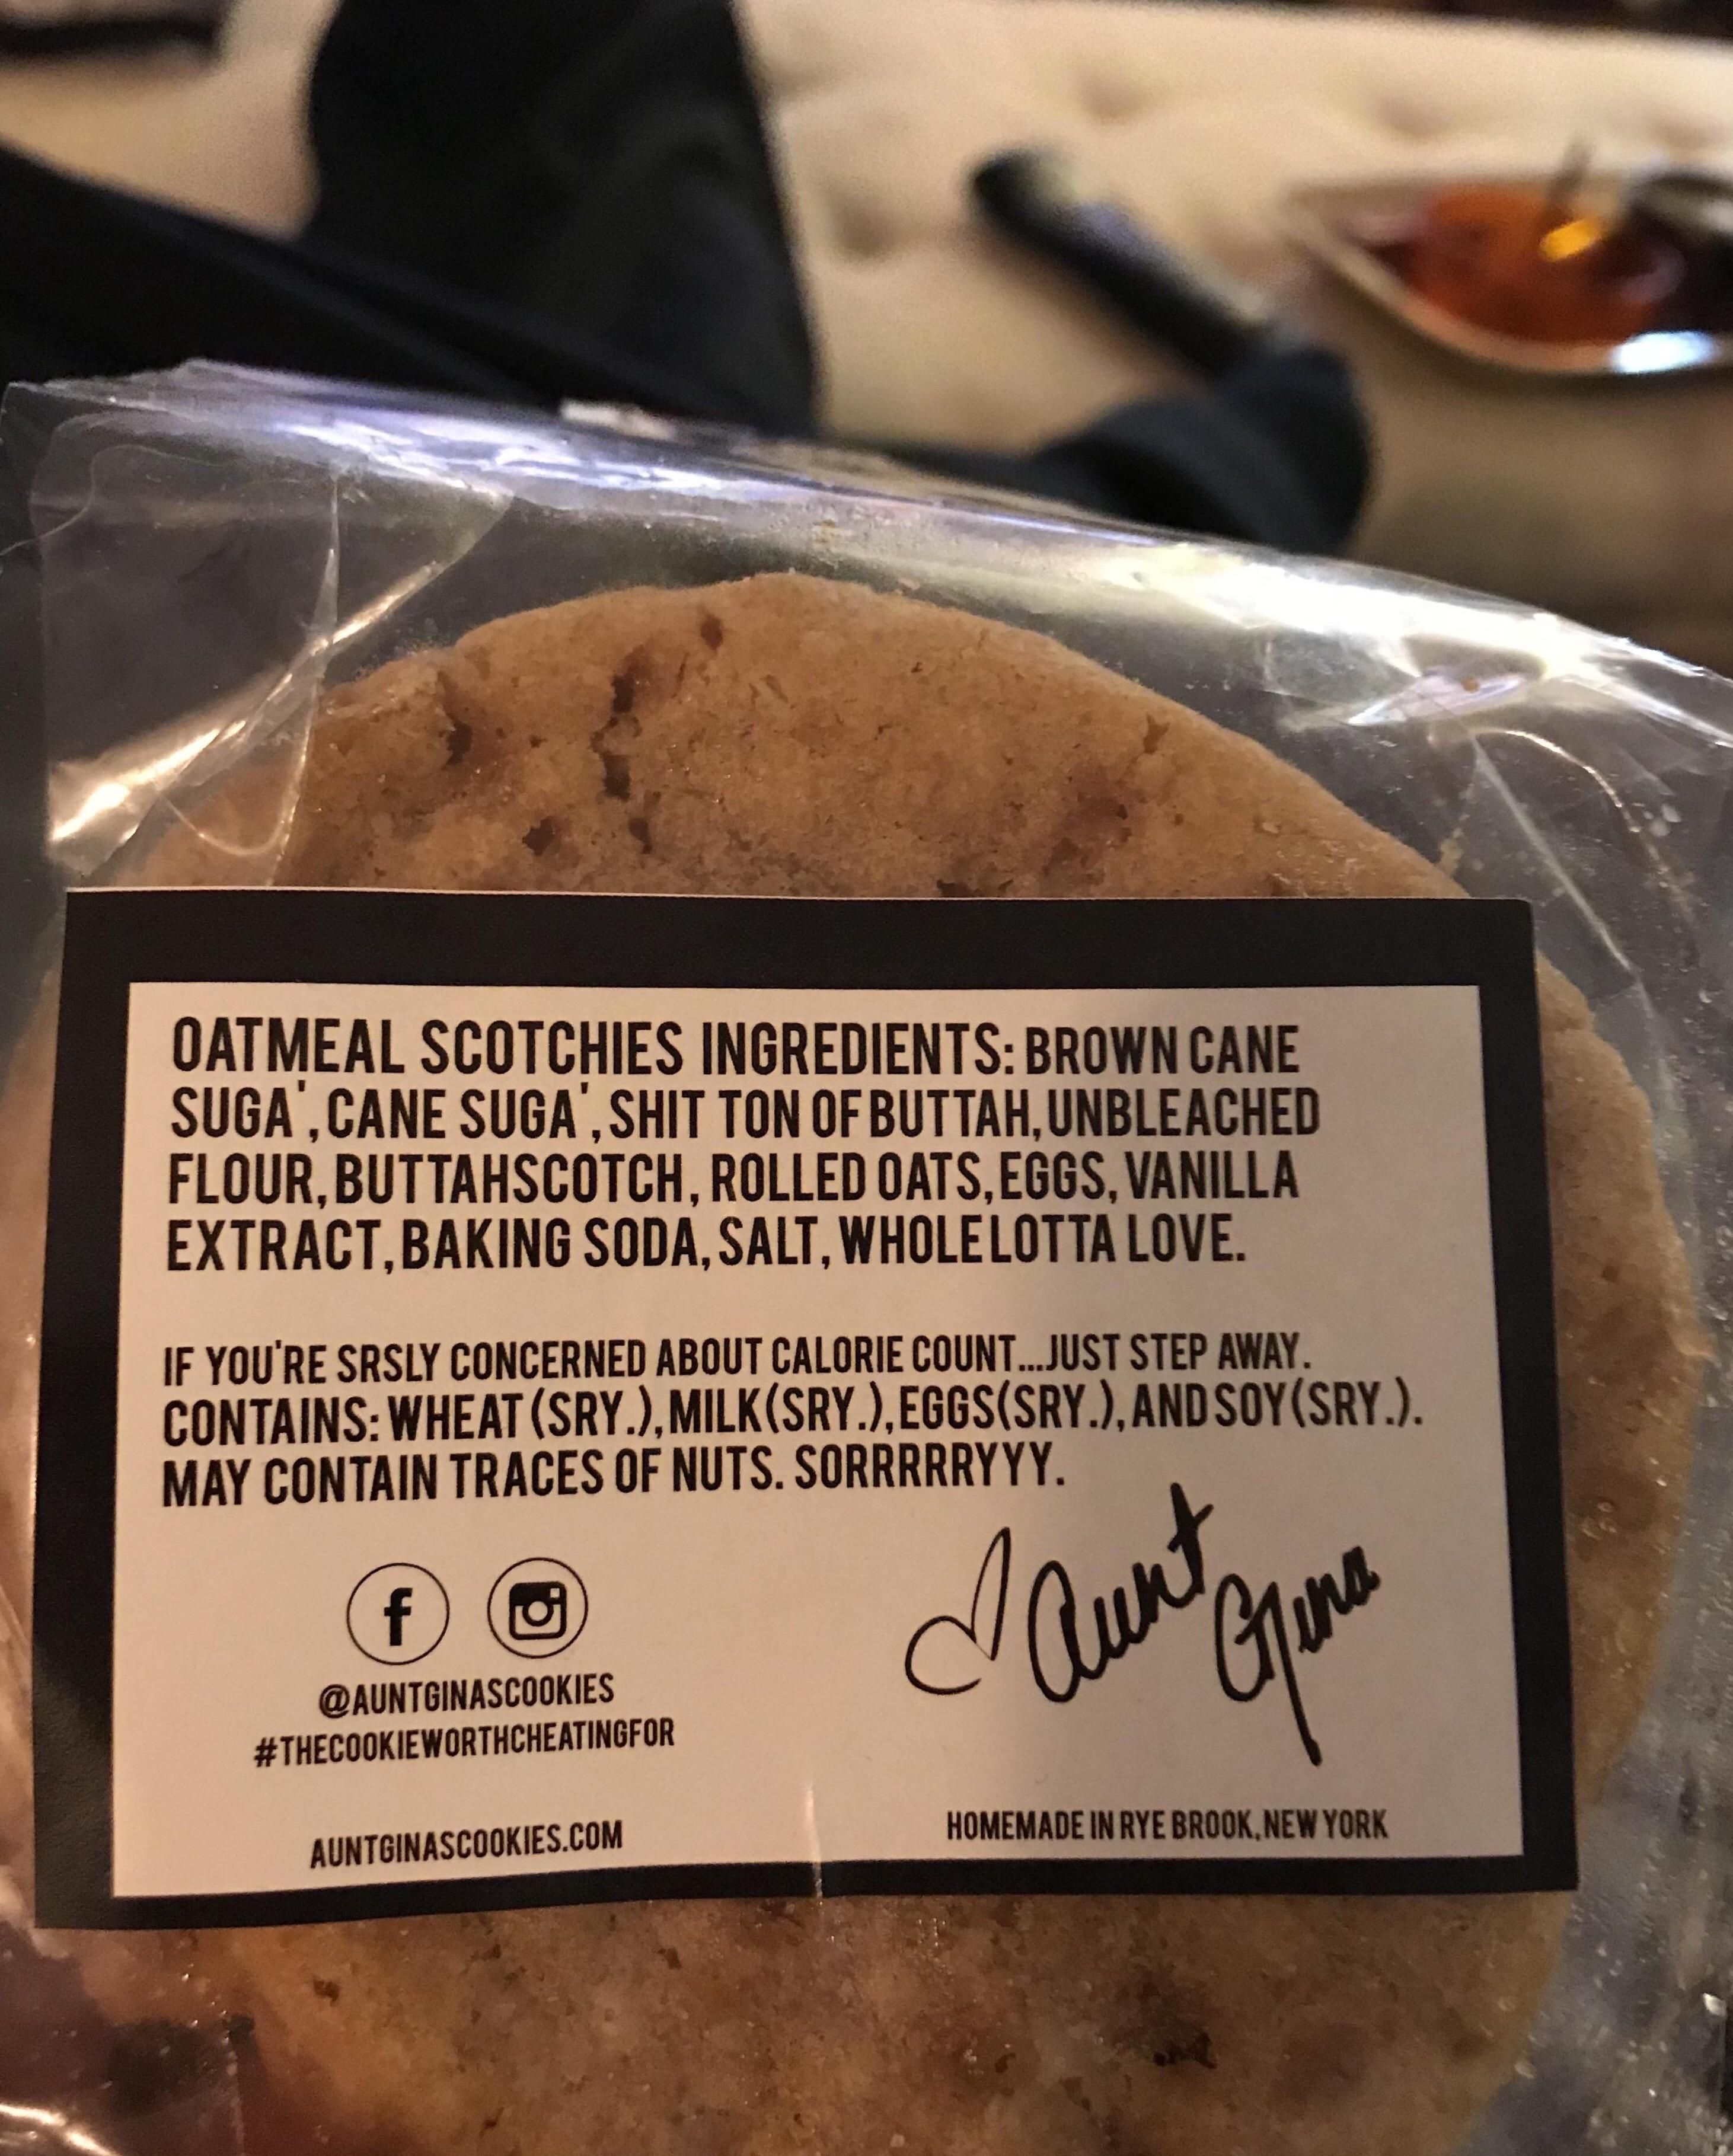 If you're going to make a cookie, do it right. Ingredients include a "shit ton of buttah"